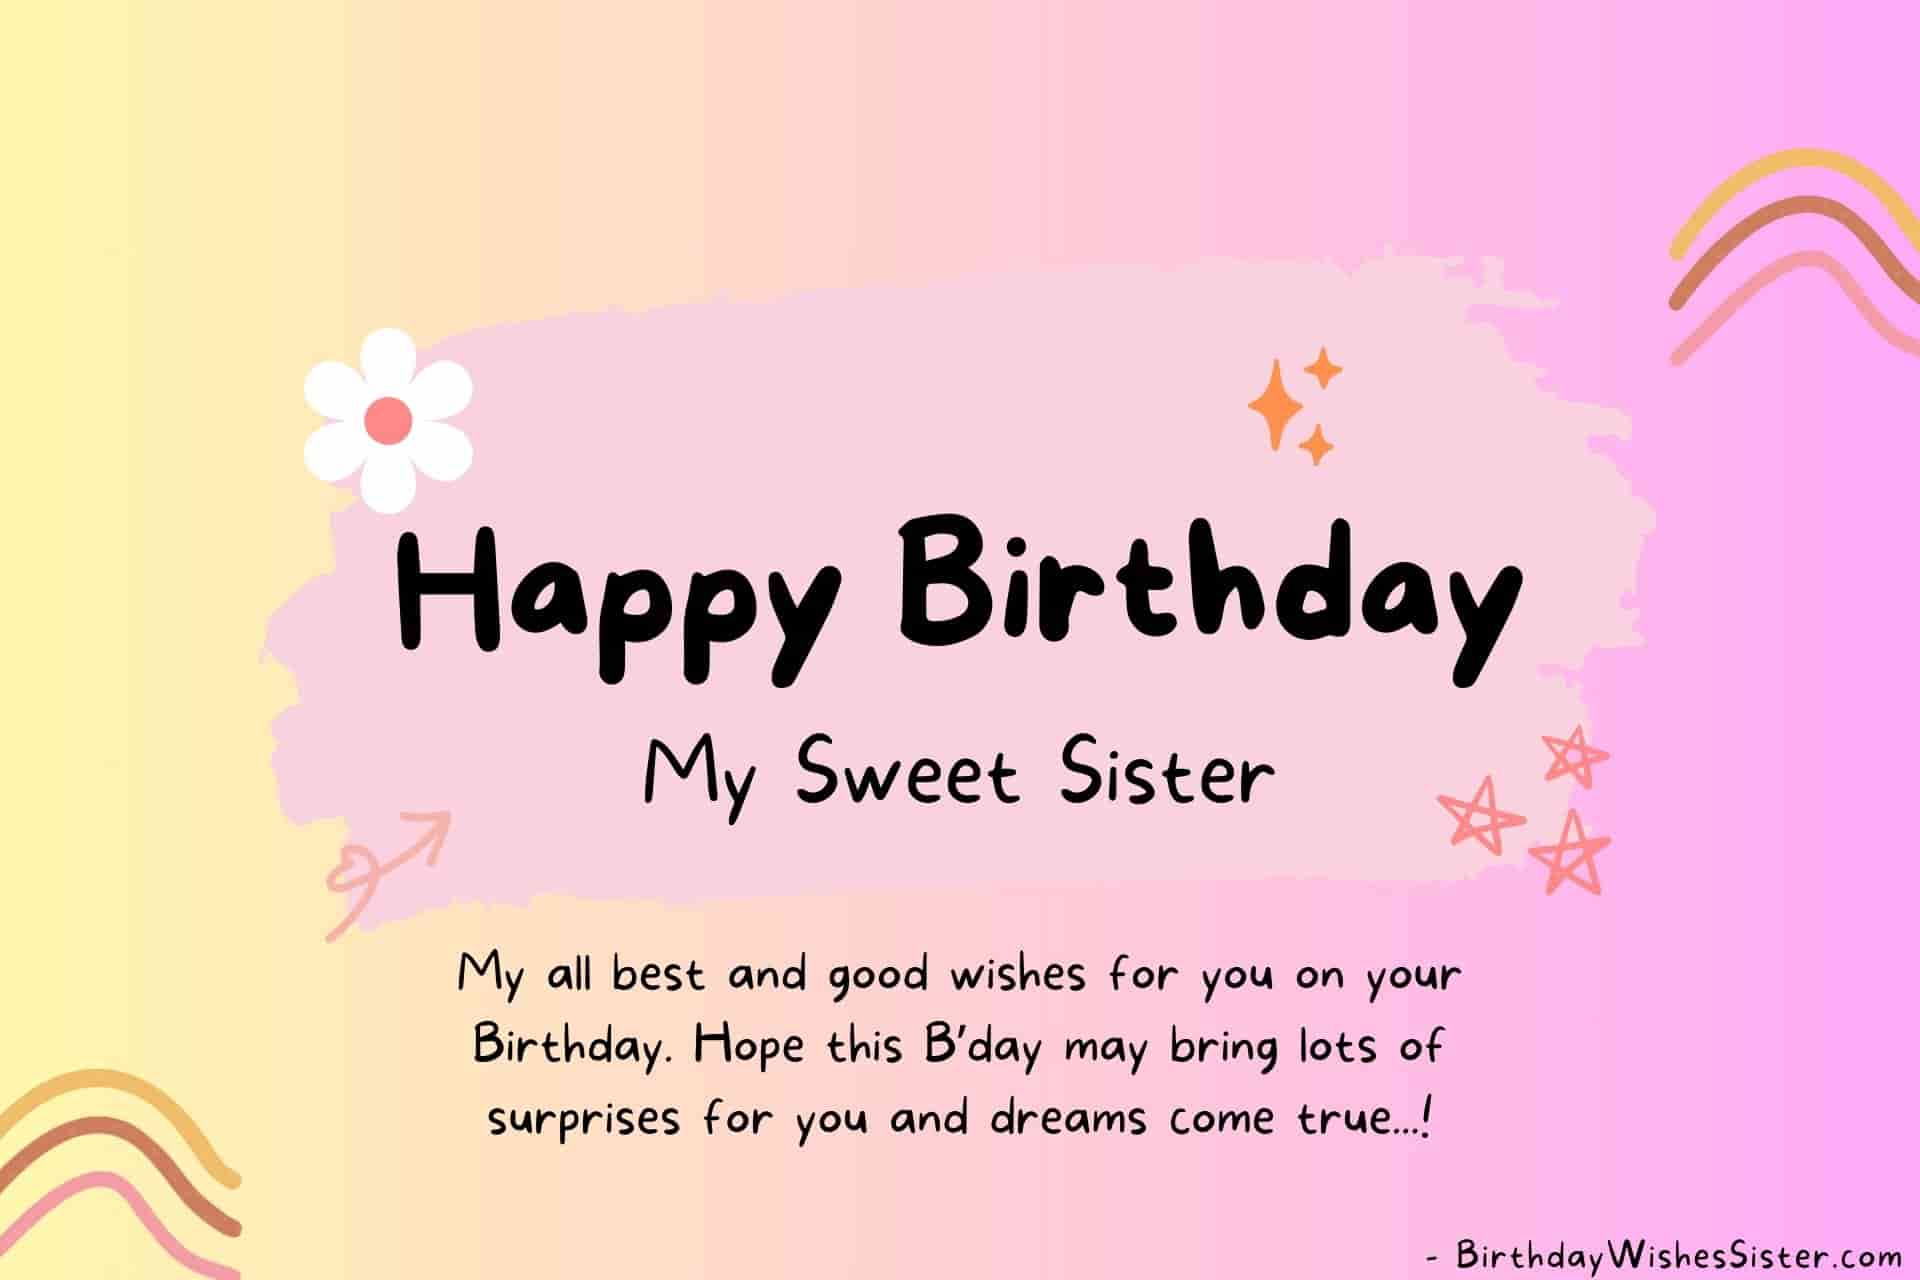 Happy Birthday To My Sister, Birthday Wishes To My Sister